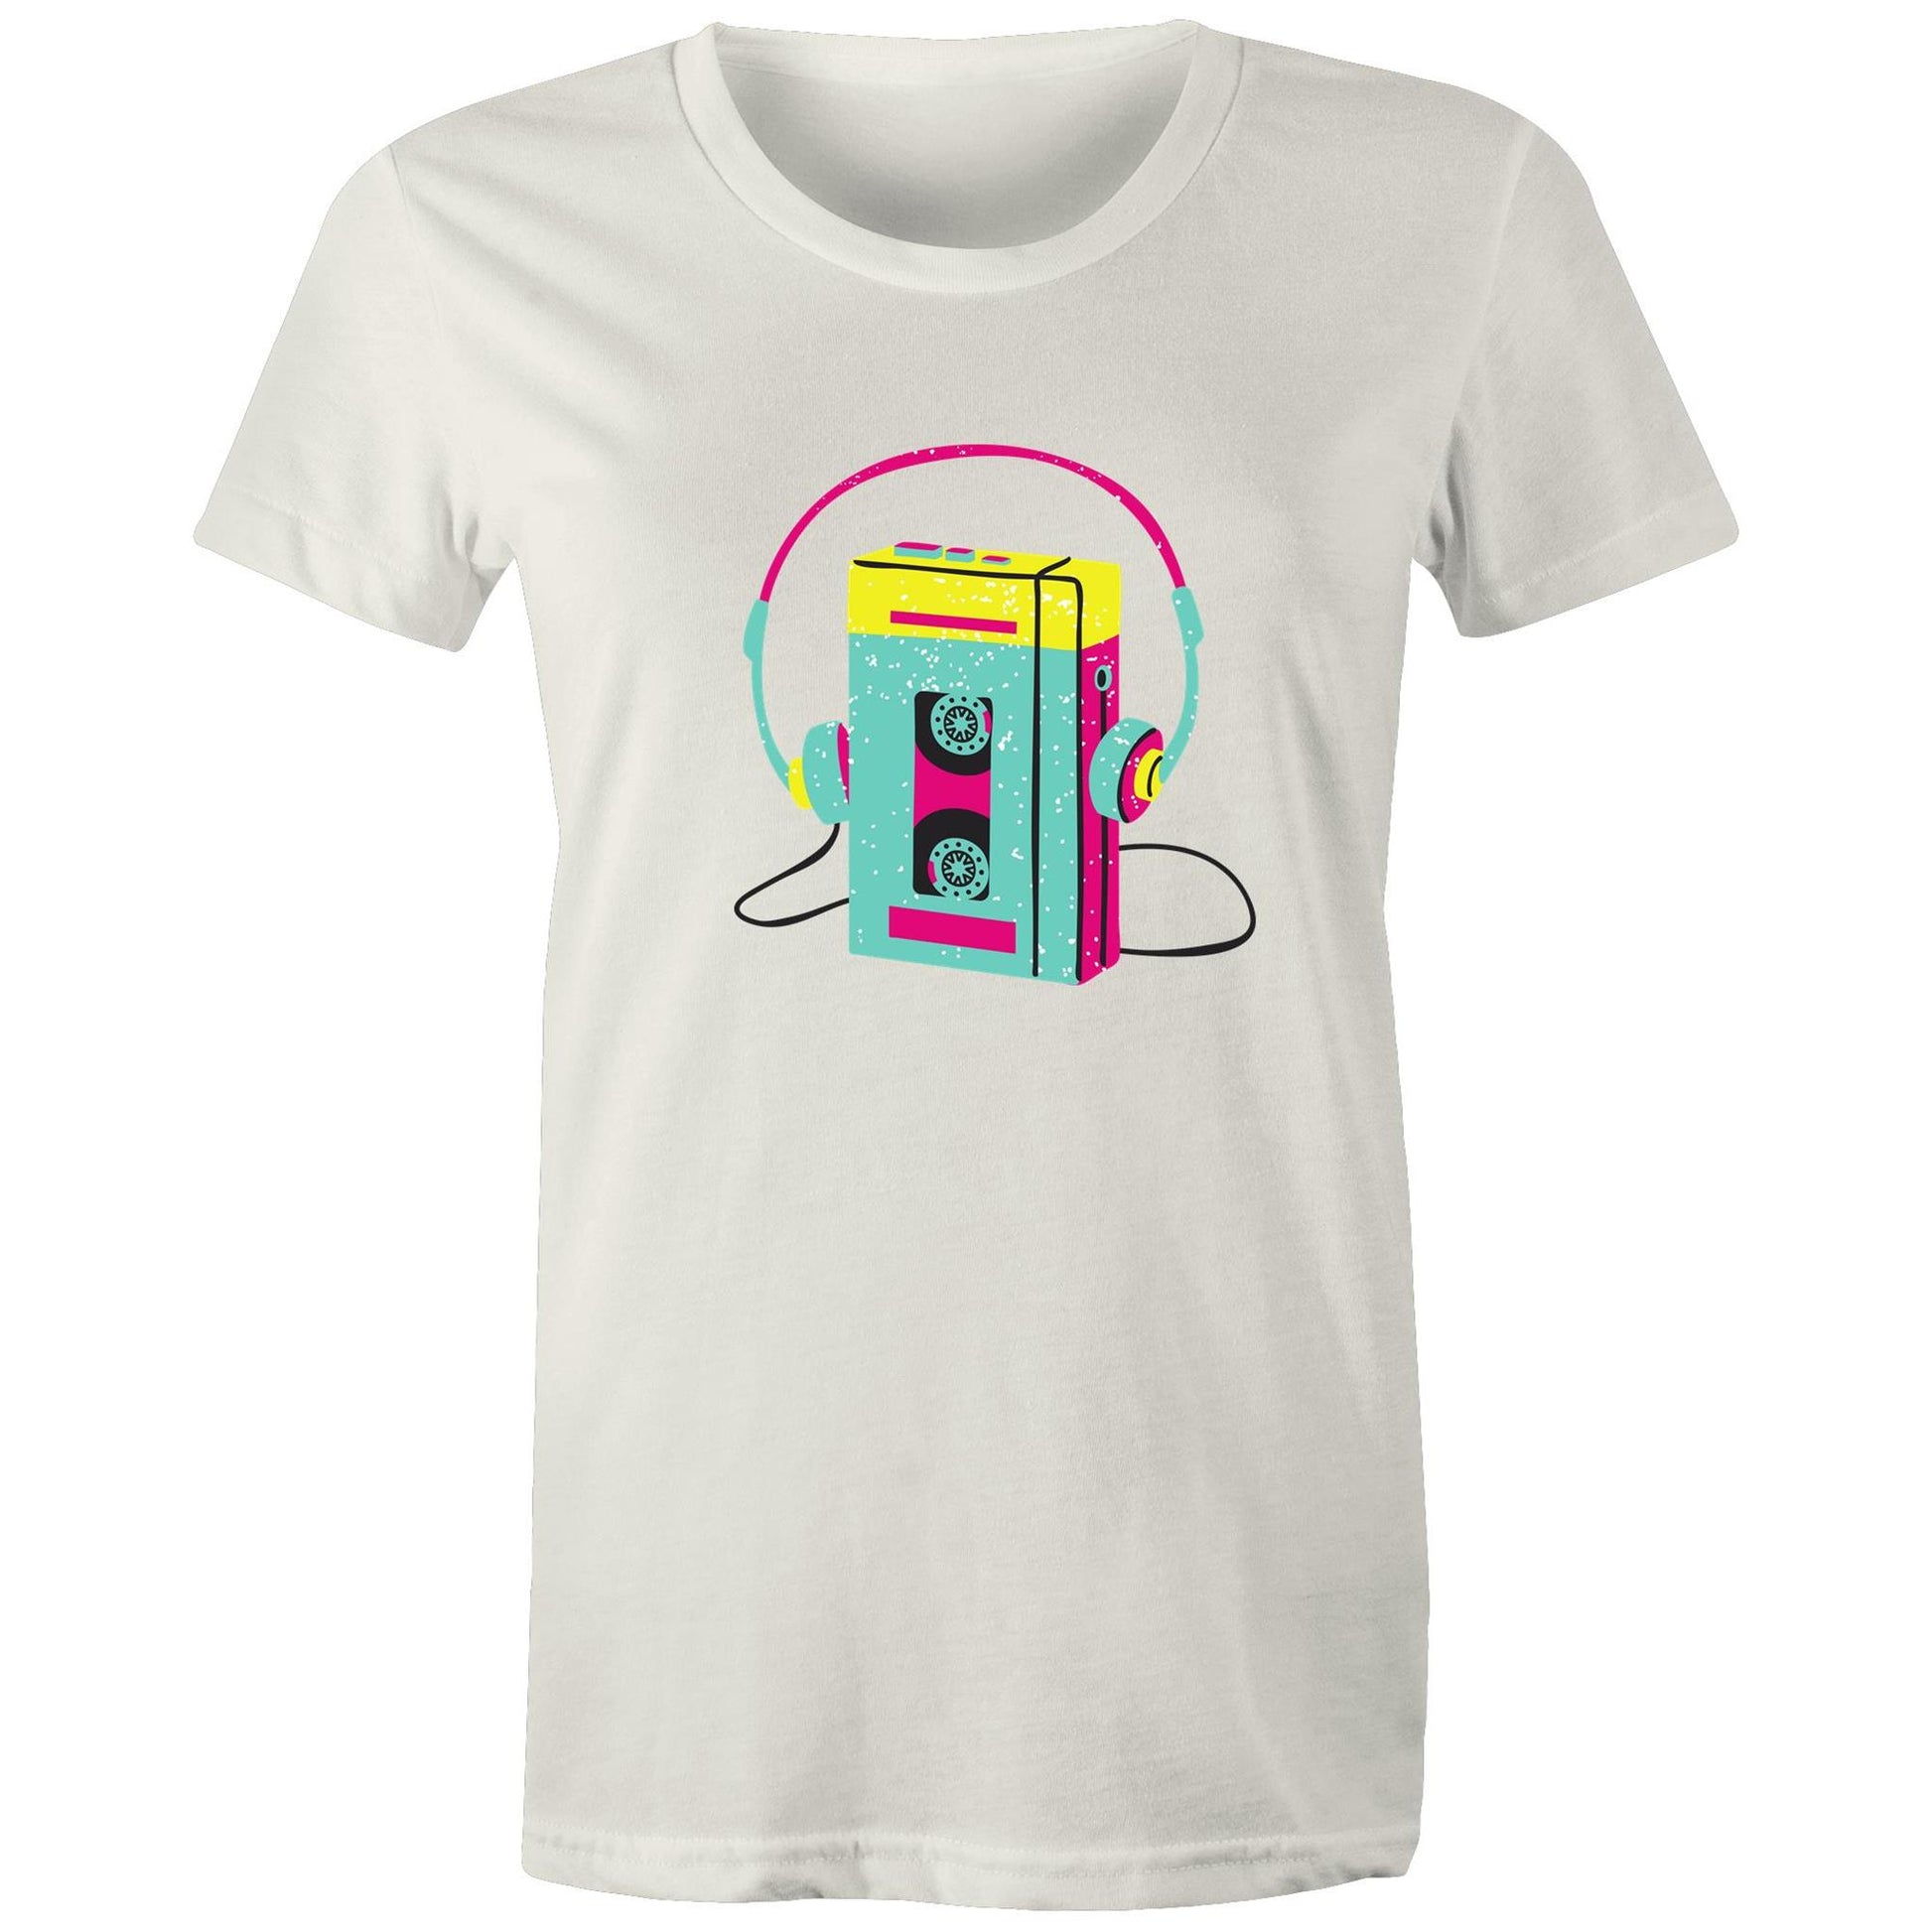 Wired For Sound, Music Player - Womens T-shirt Natural Womens T-shirt Music Retro Womens